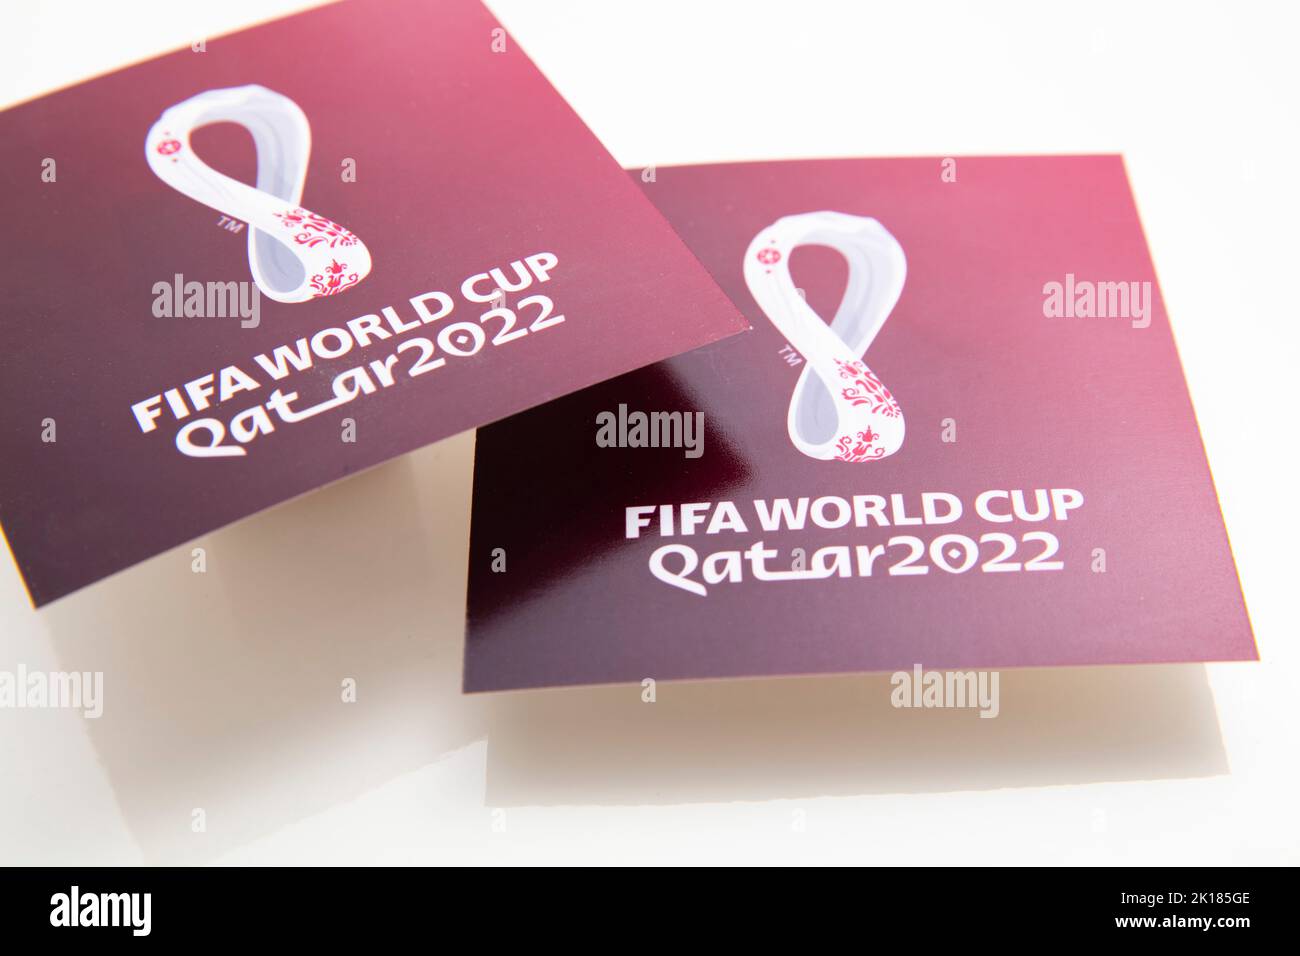 FIFA World Cup 2022: Official emblem launched in Qatar